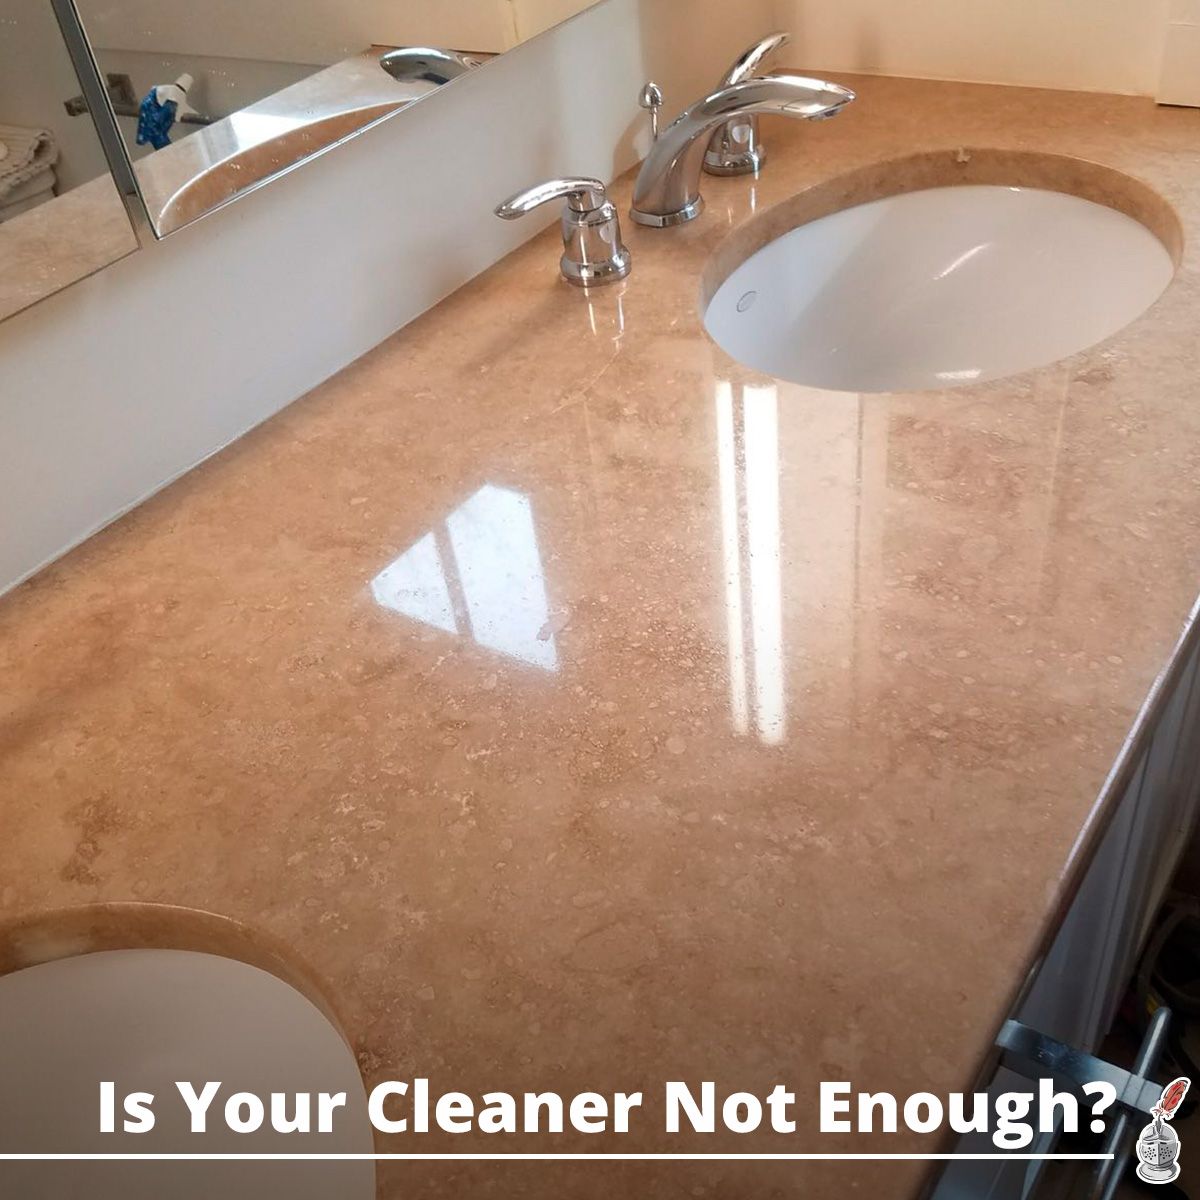 Is Your Cleaner Not Enough?